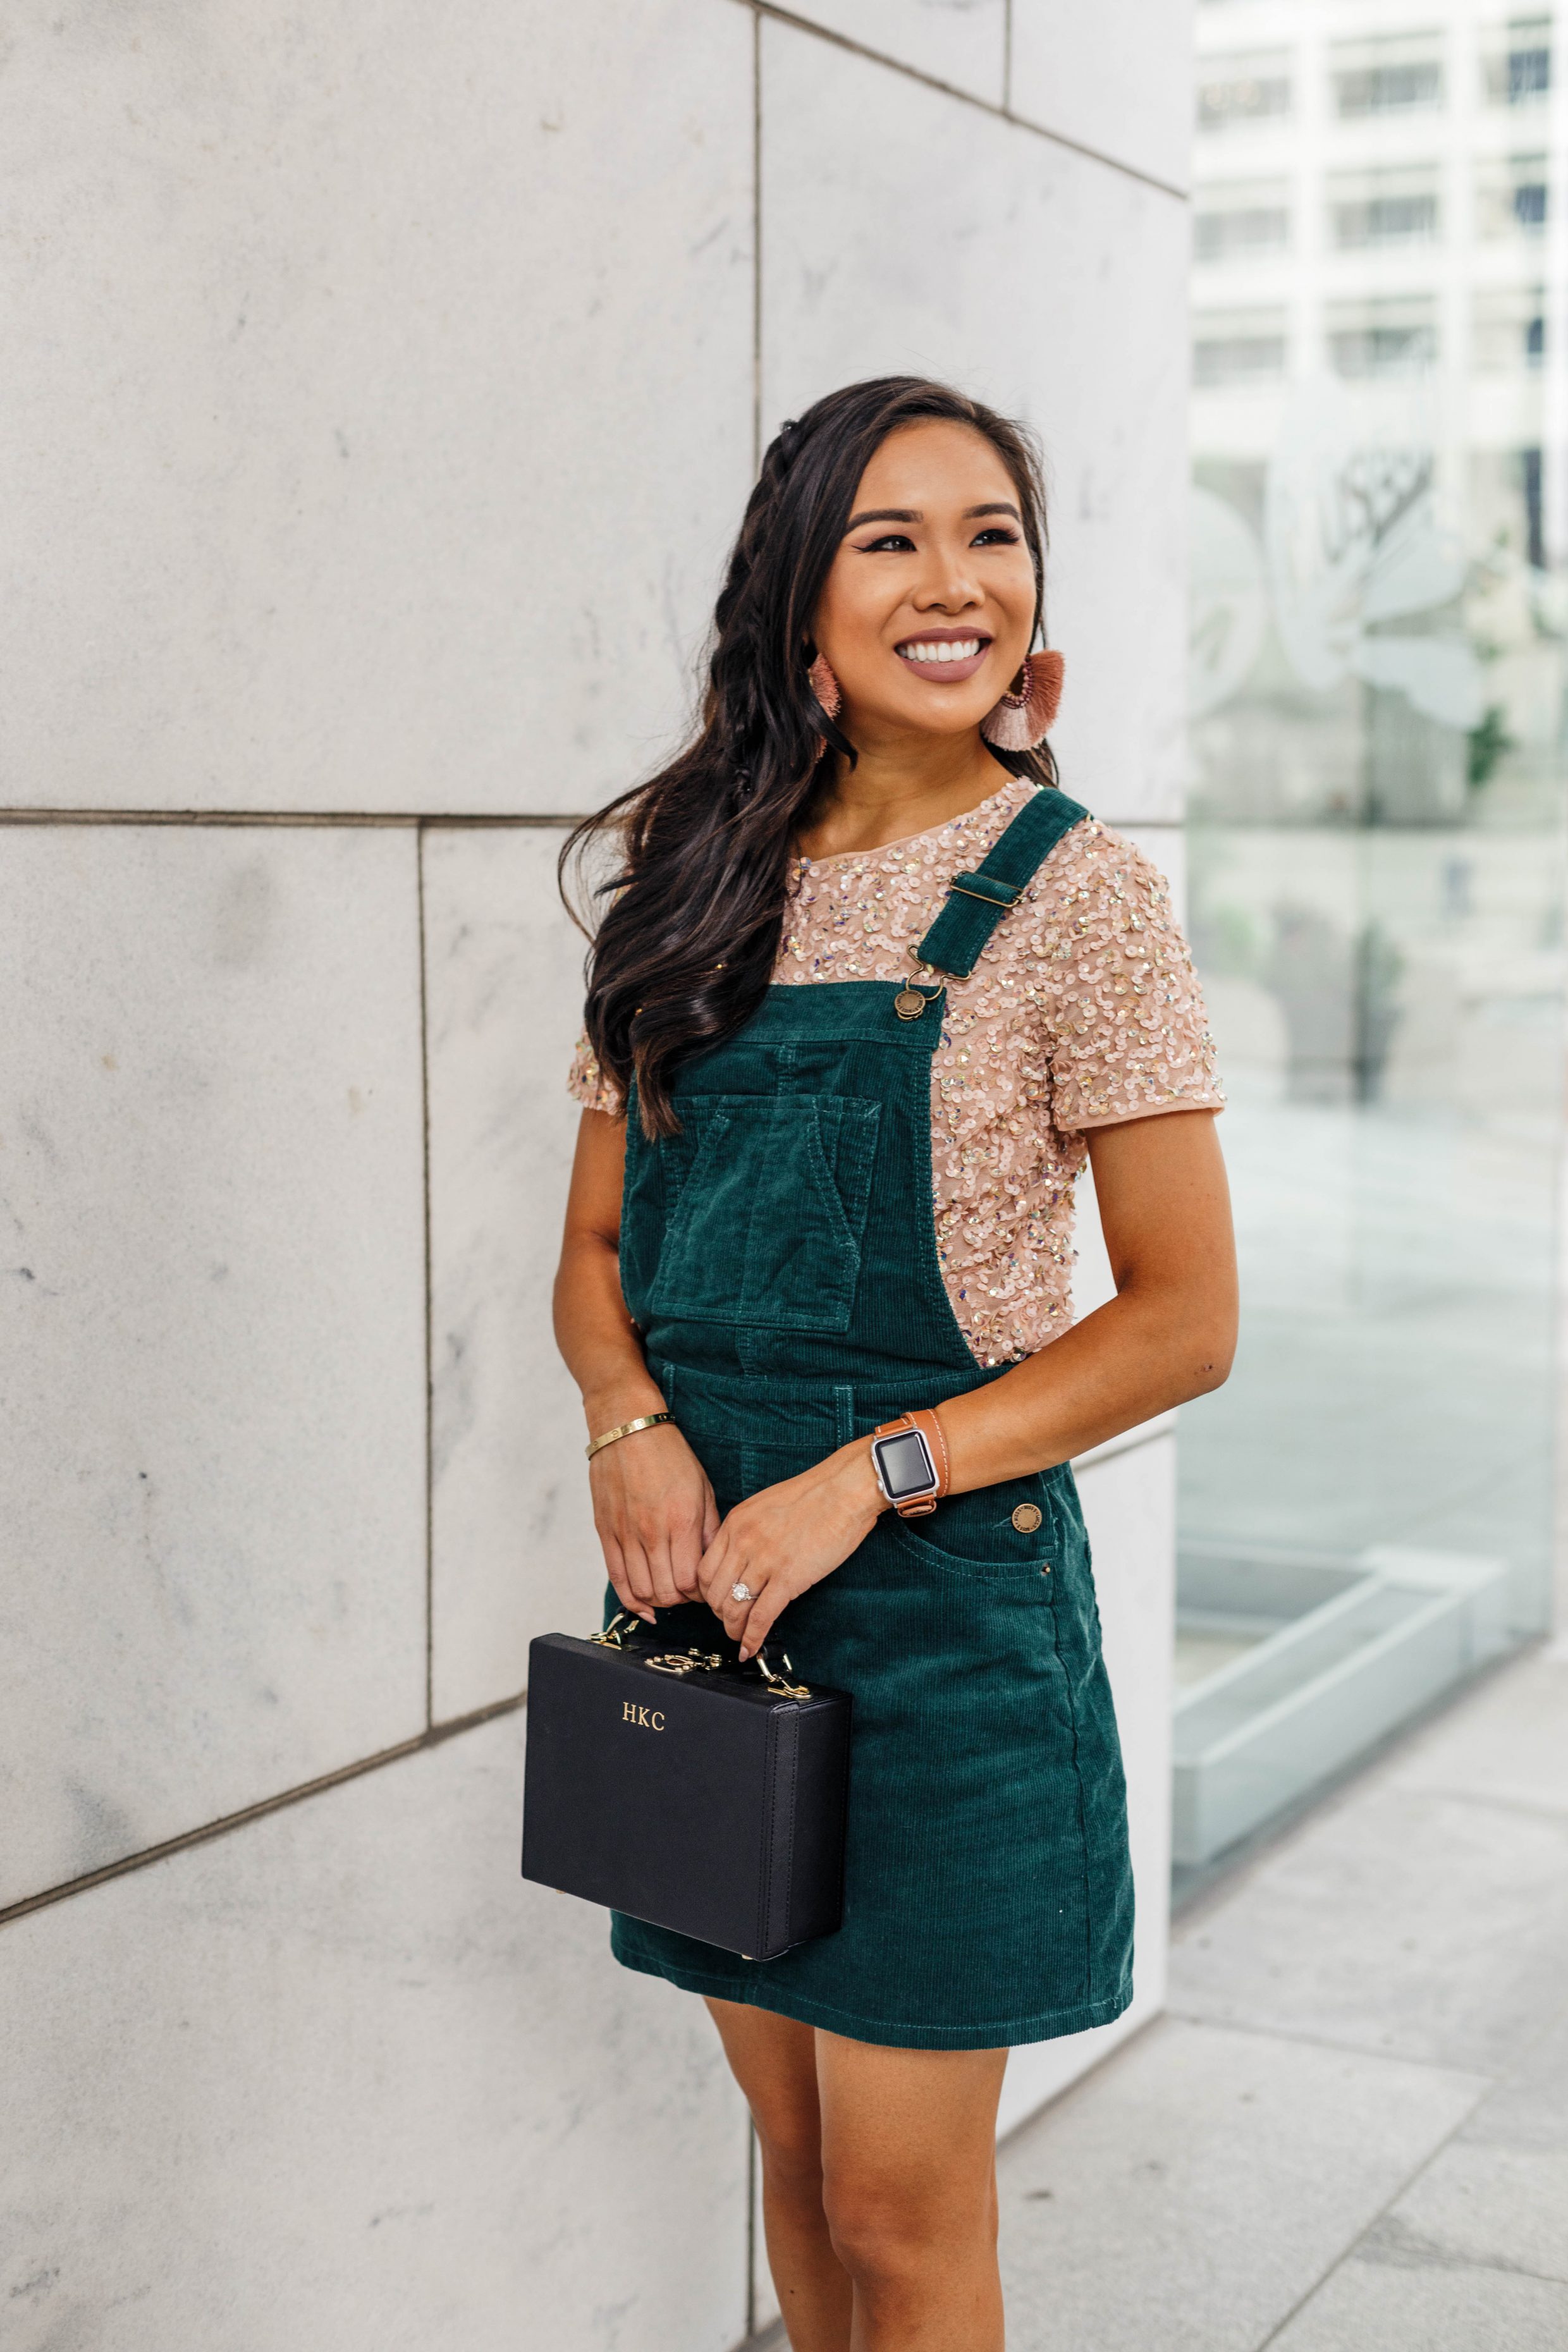 Hoang-Kim wears a green corduroy overall dress with a blush sequin t-shirt